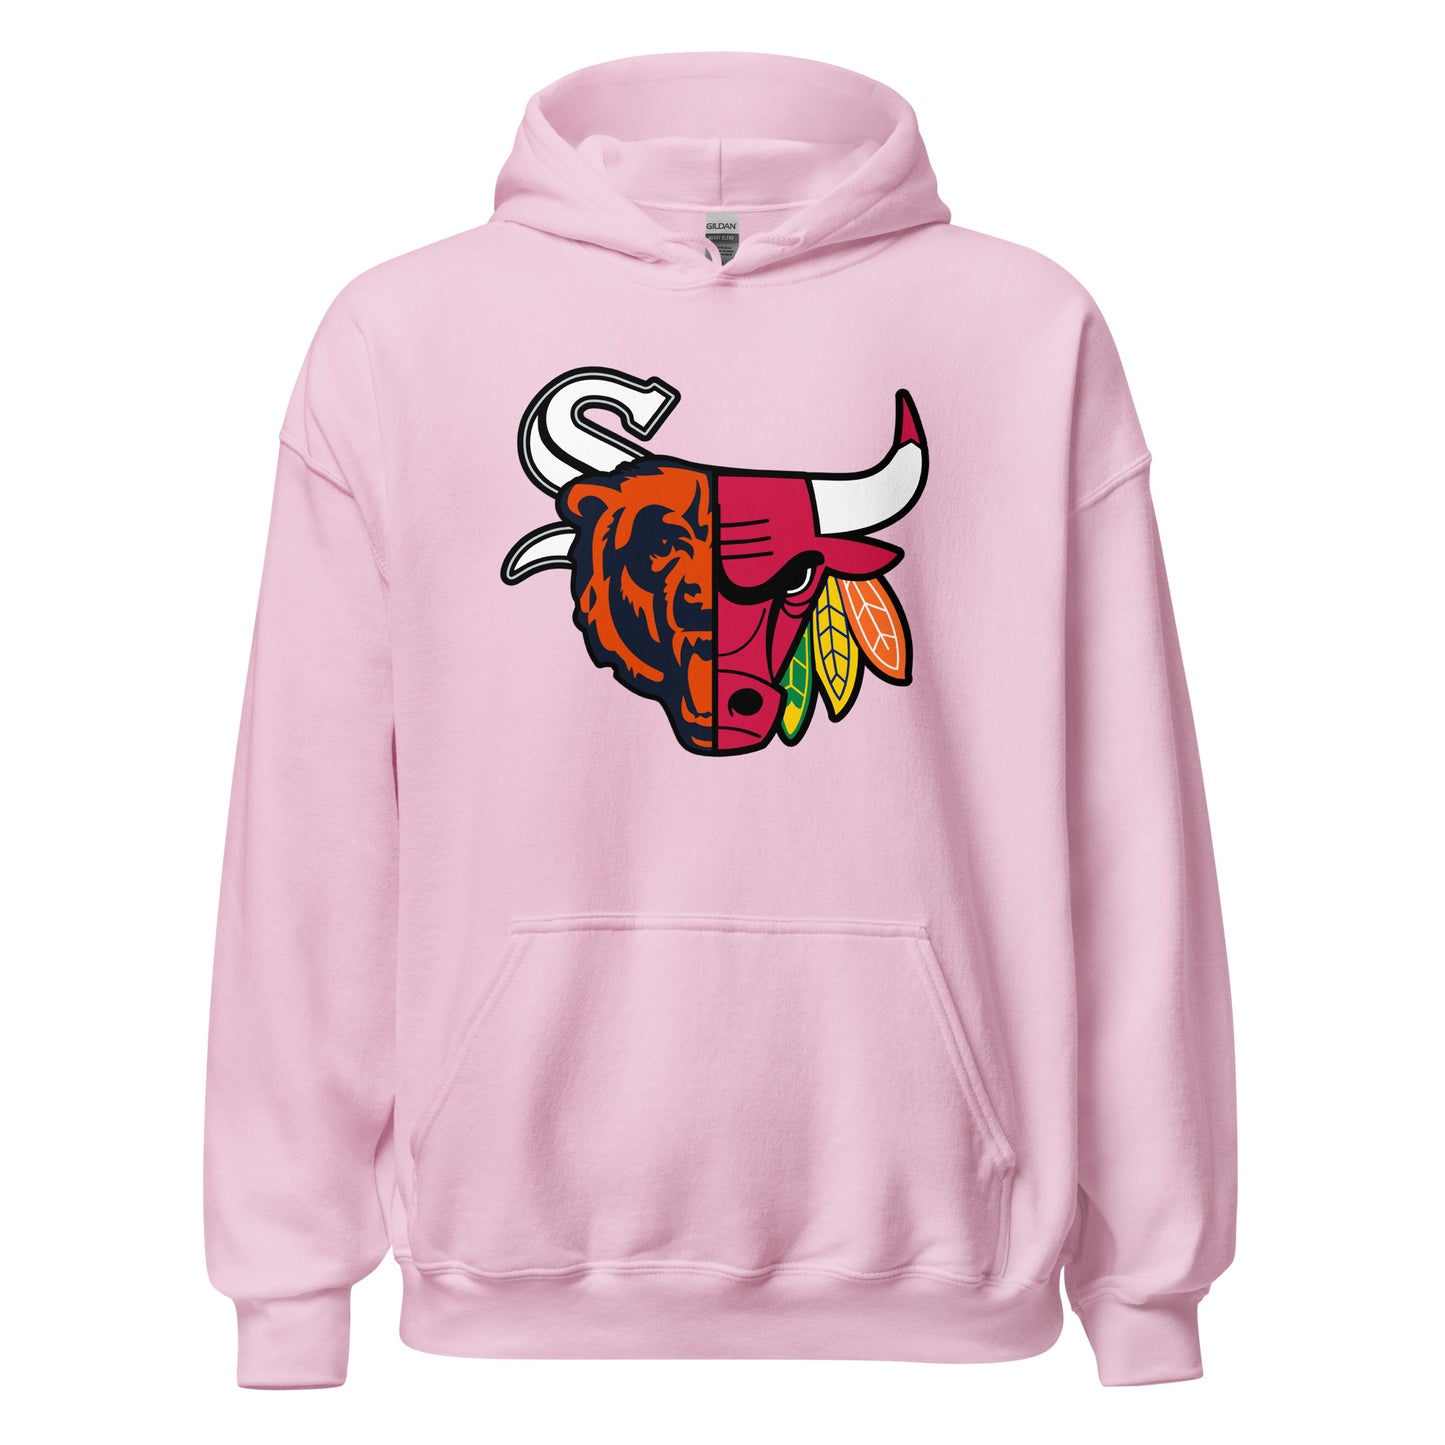 CHI (Sox) Hoodie - Full Color